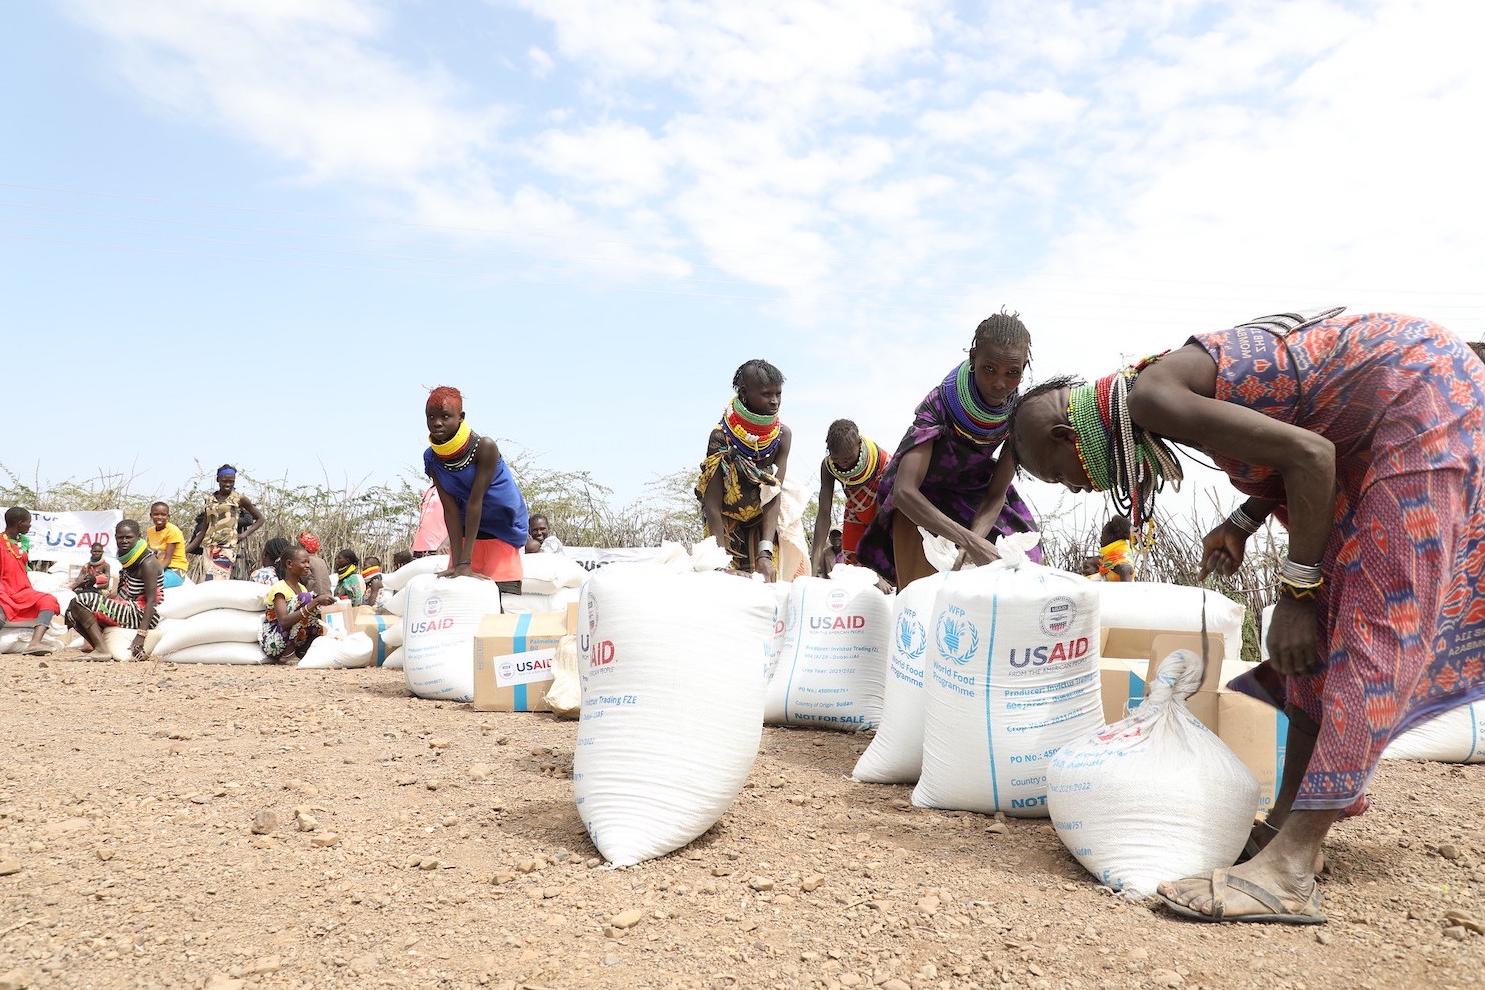 USAID emergency food relief in east africa - famine - fighting global hunger